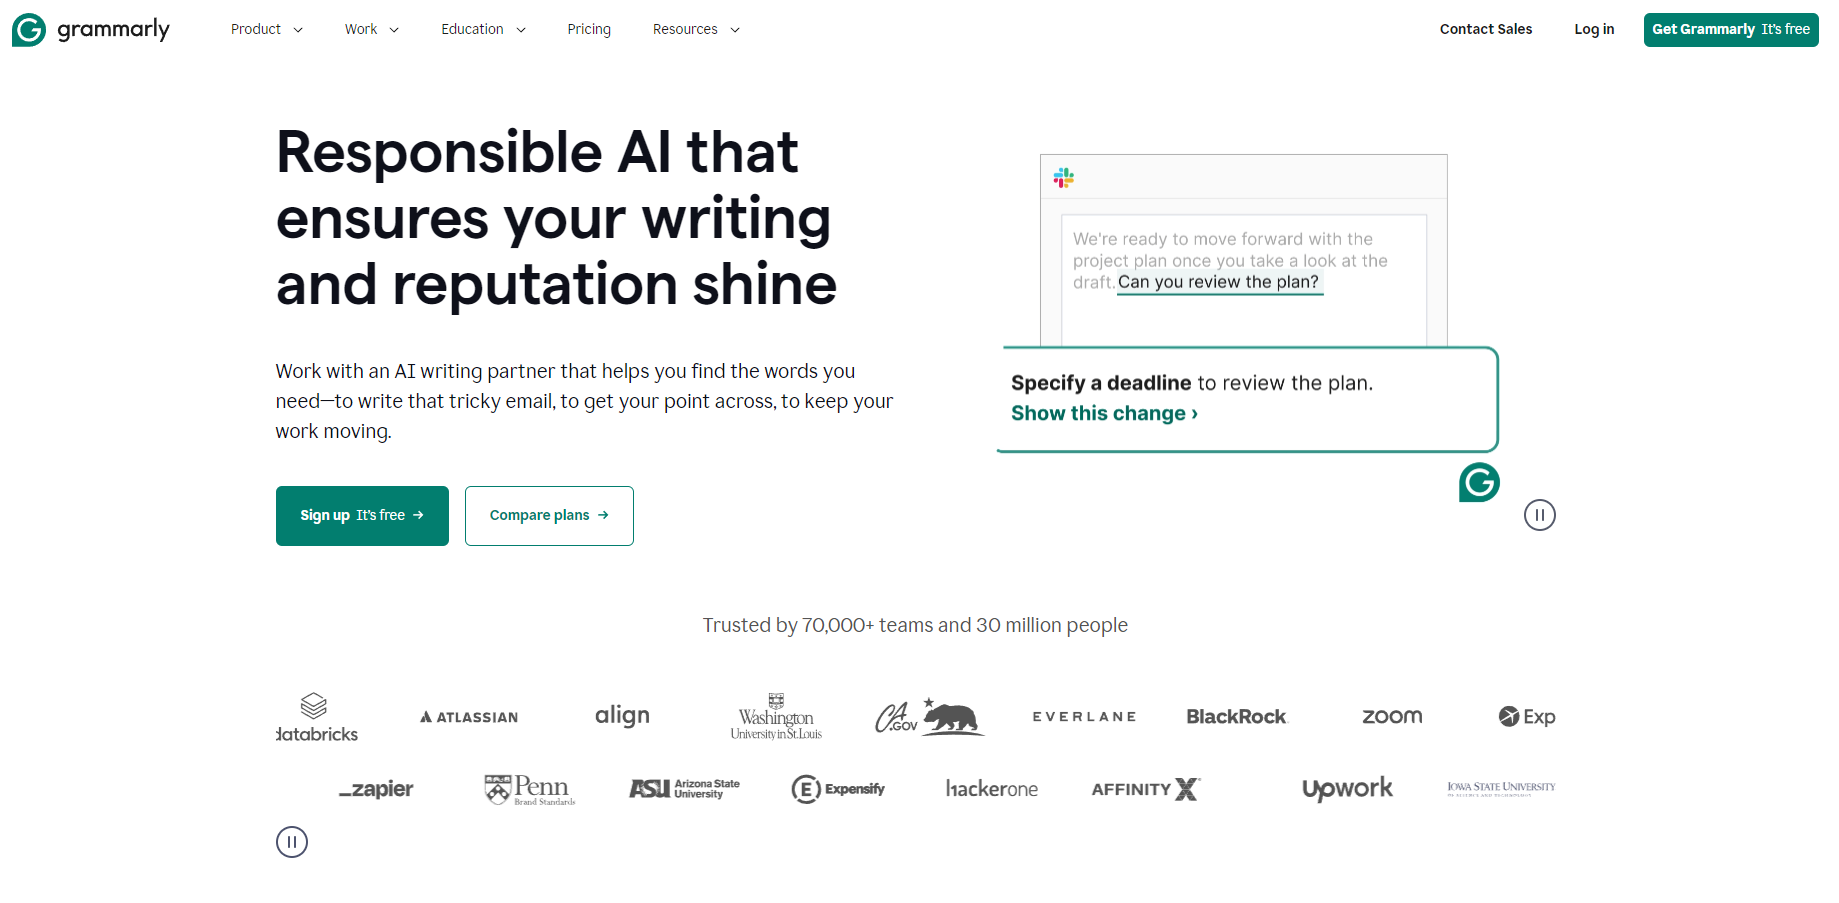 Grammarly stands out as an AI-powered writing correction tool that enhances grammar, style, and text clarity